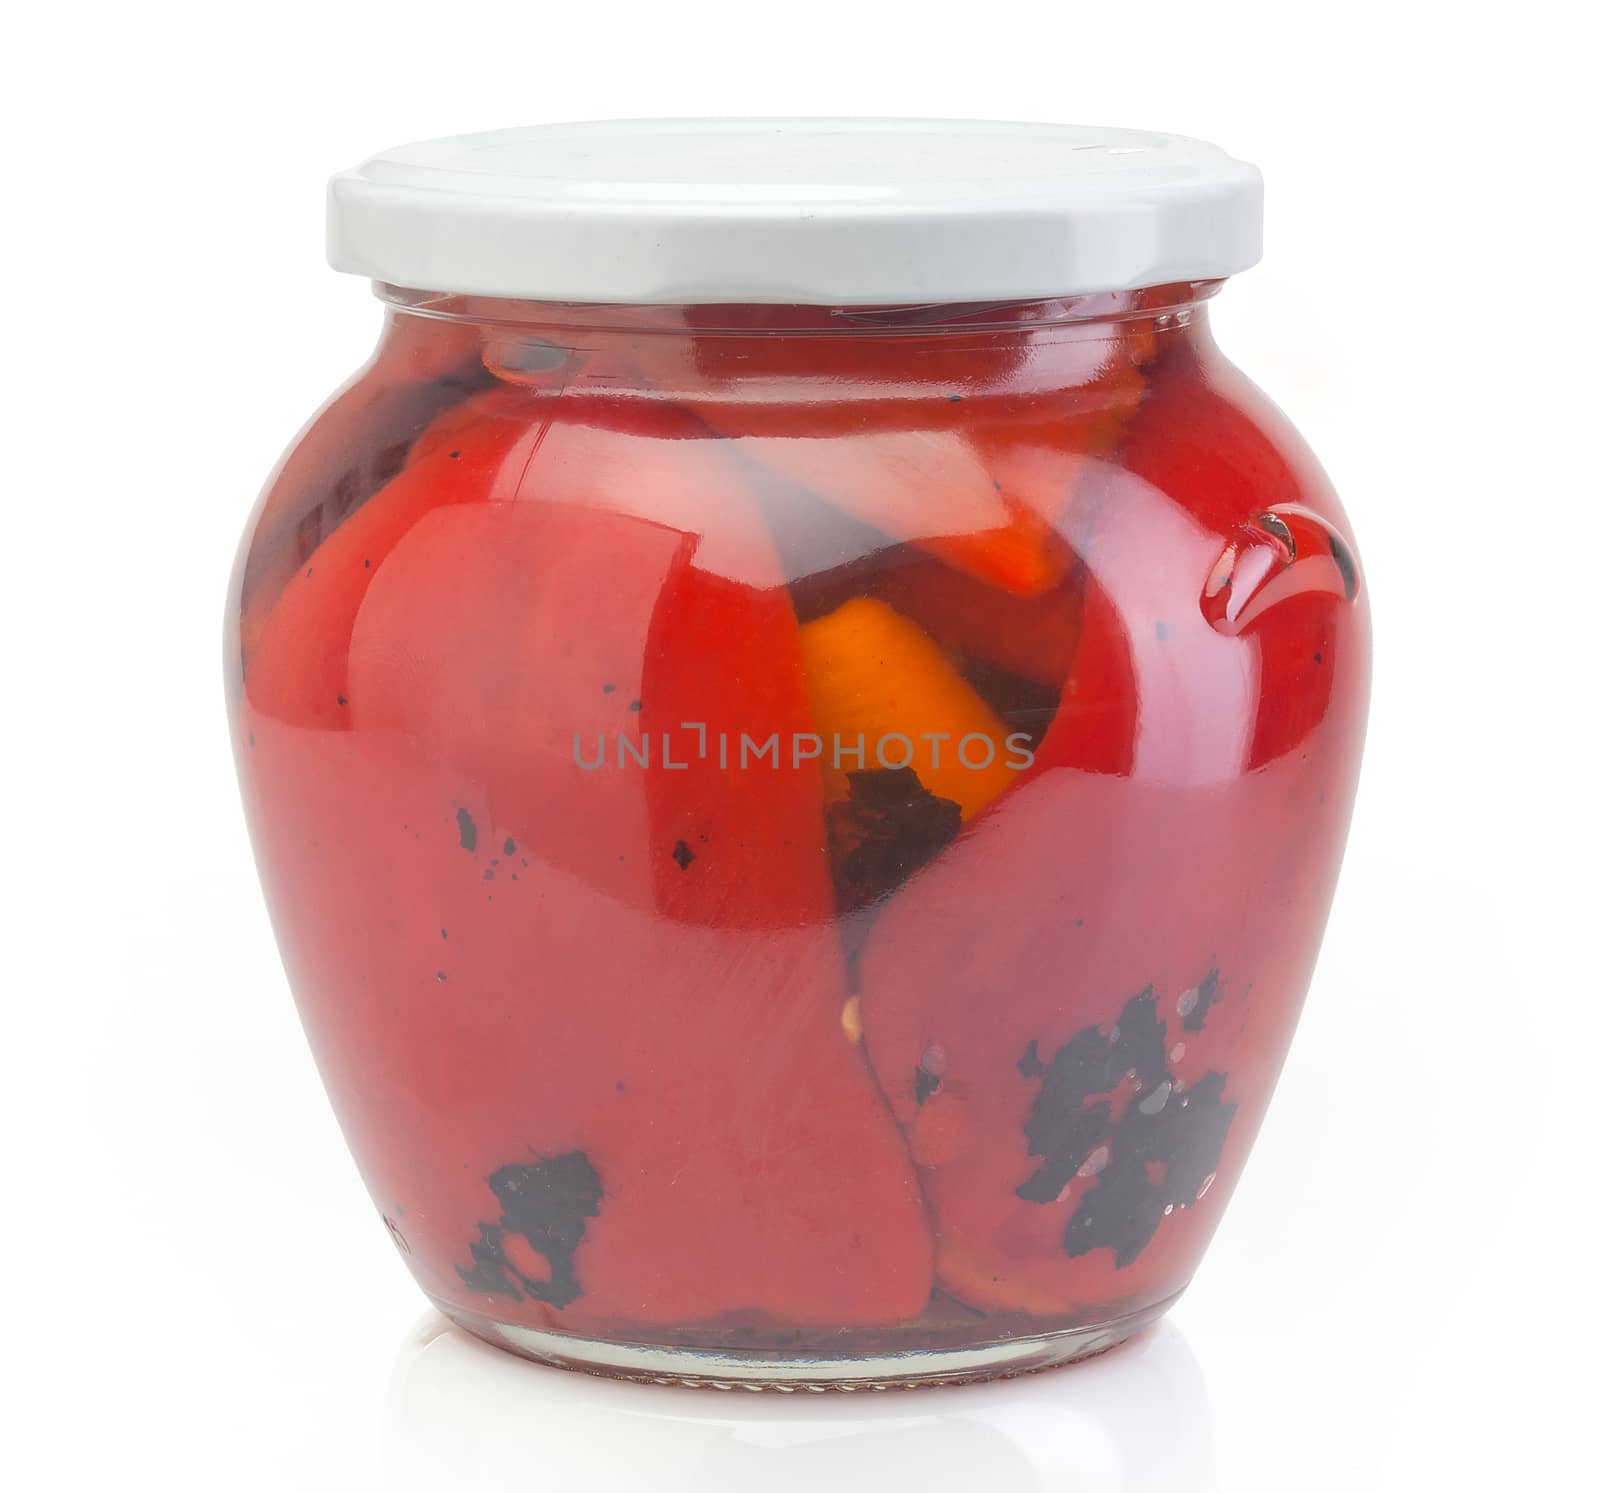 Isolated glass jar with conserved roasted red paprika